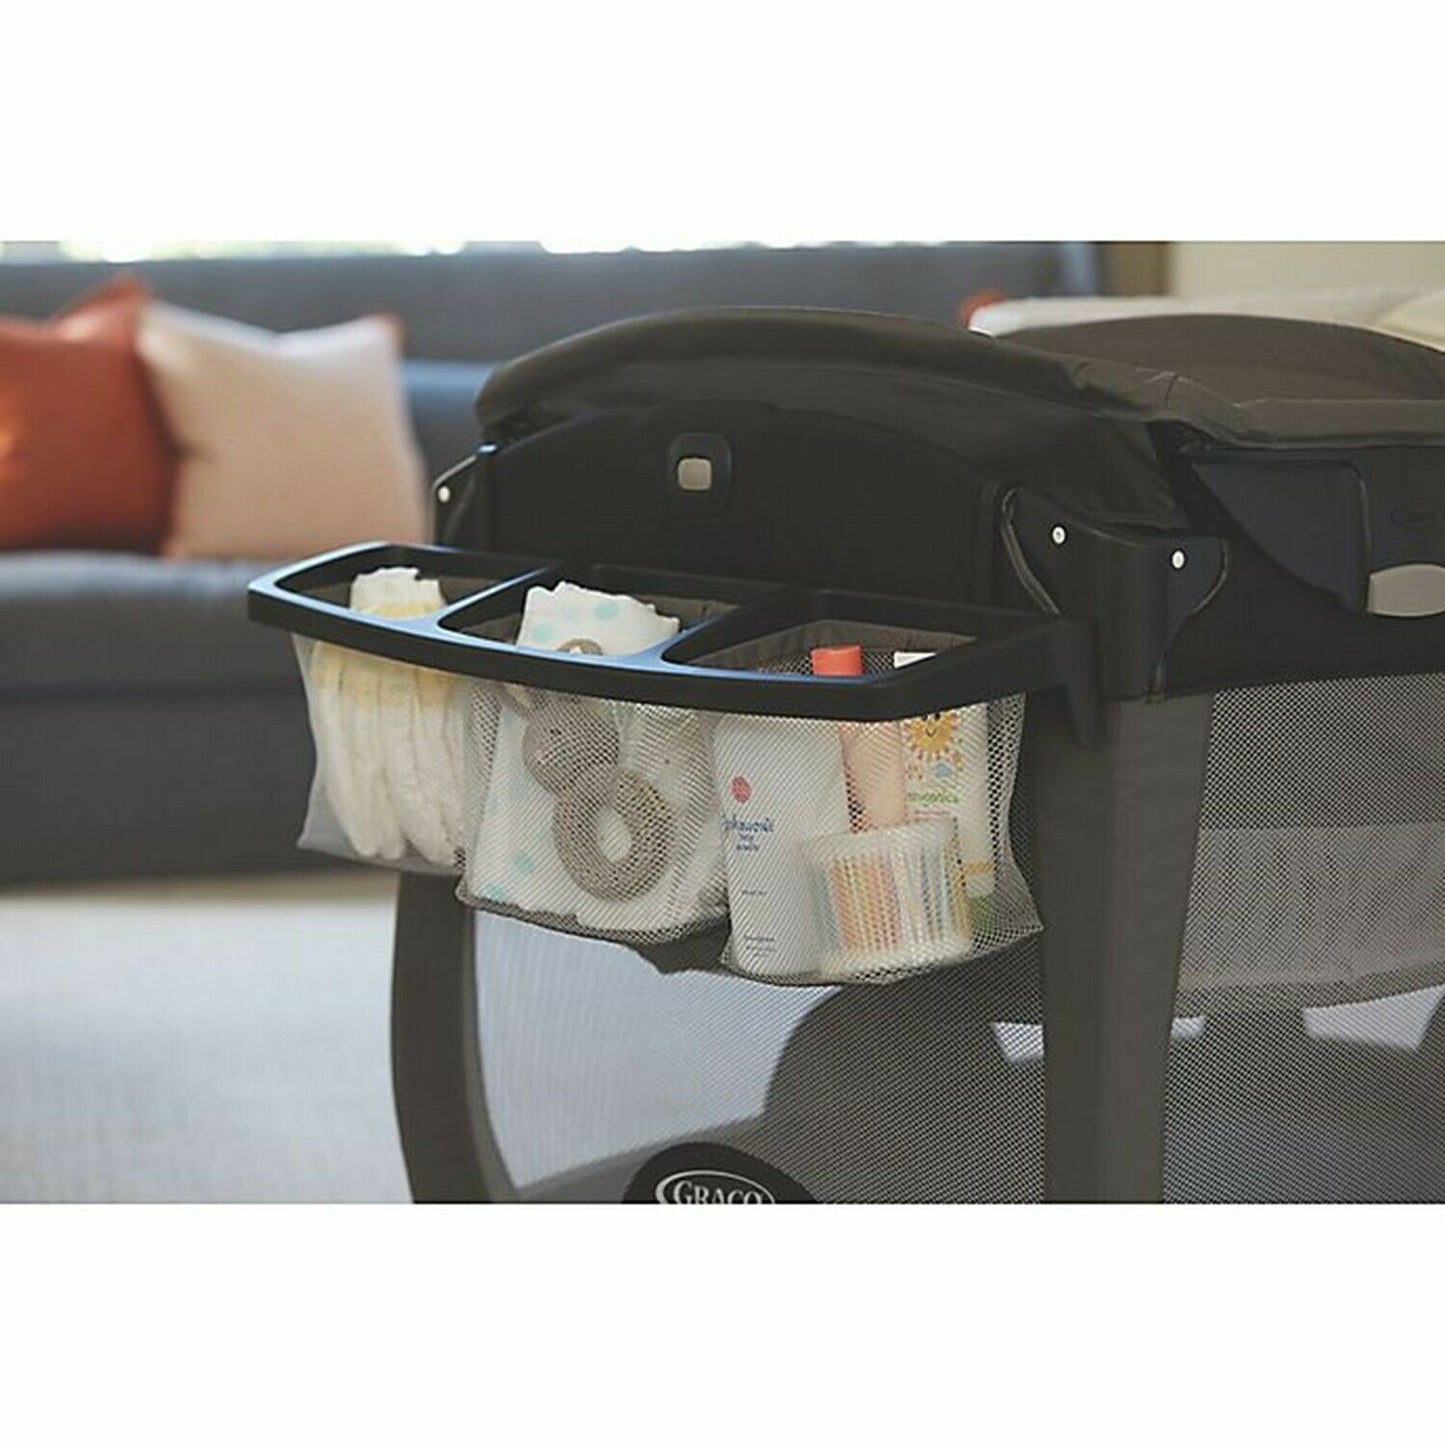 Baby Stroller with Car Seat Travel System Jogging Combo Playard High Chair New